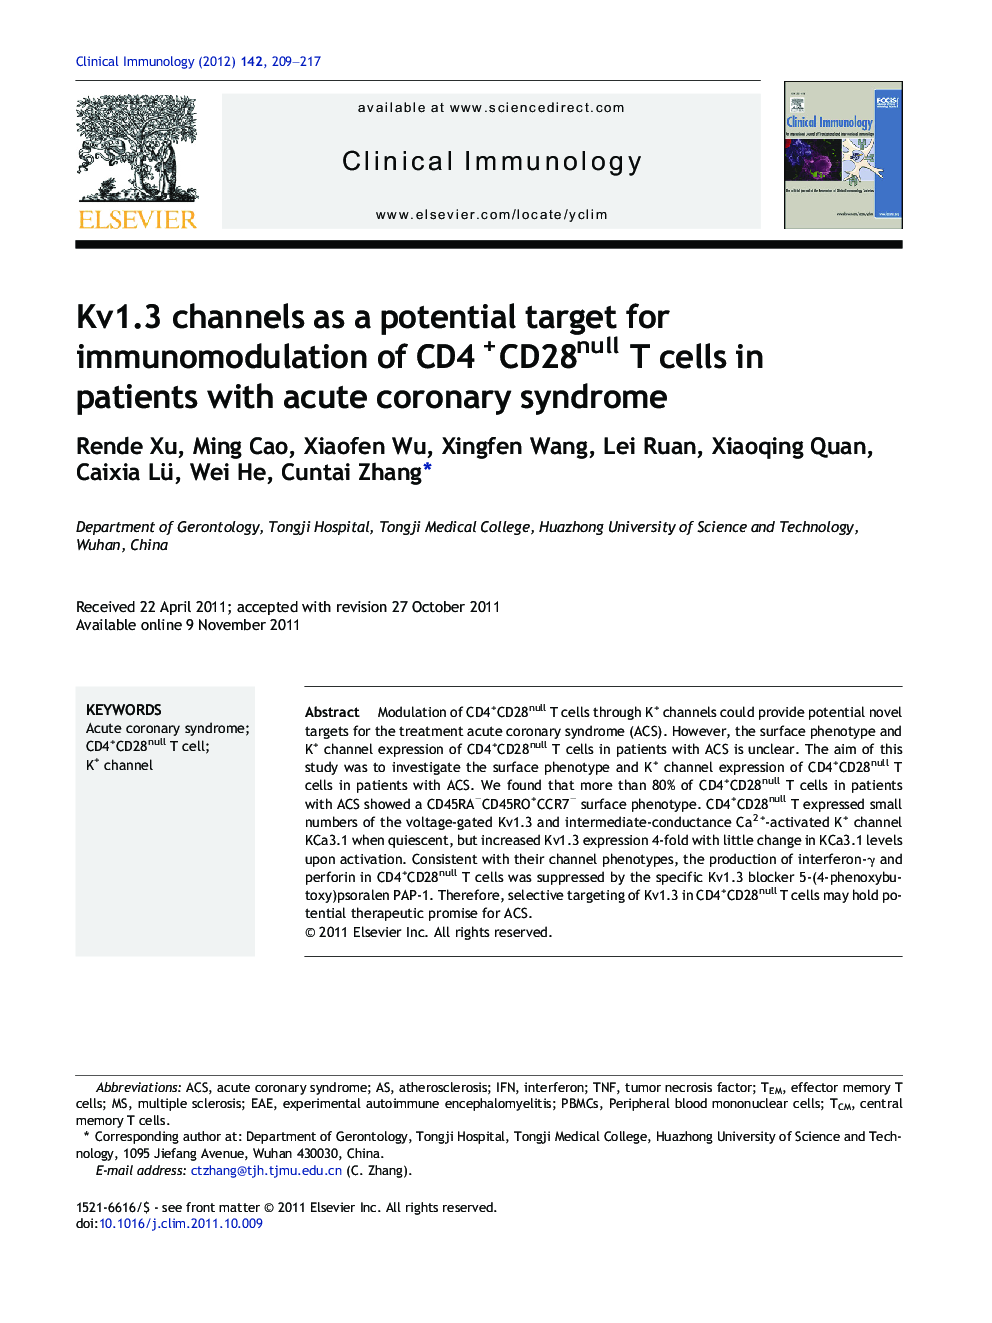 Kv1.3 channels as a potential target for immunomodulation of CD4+CD28null T cells in patients with acute coronary syndrome